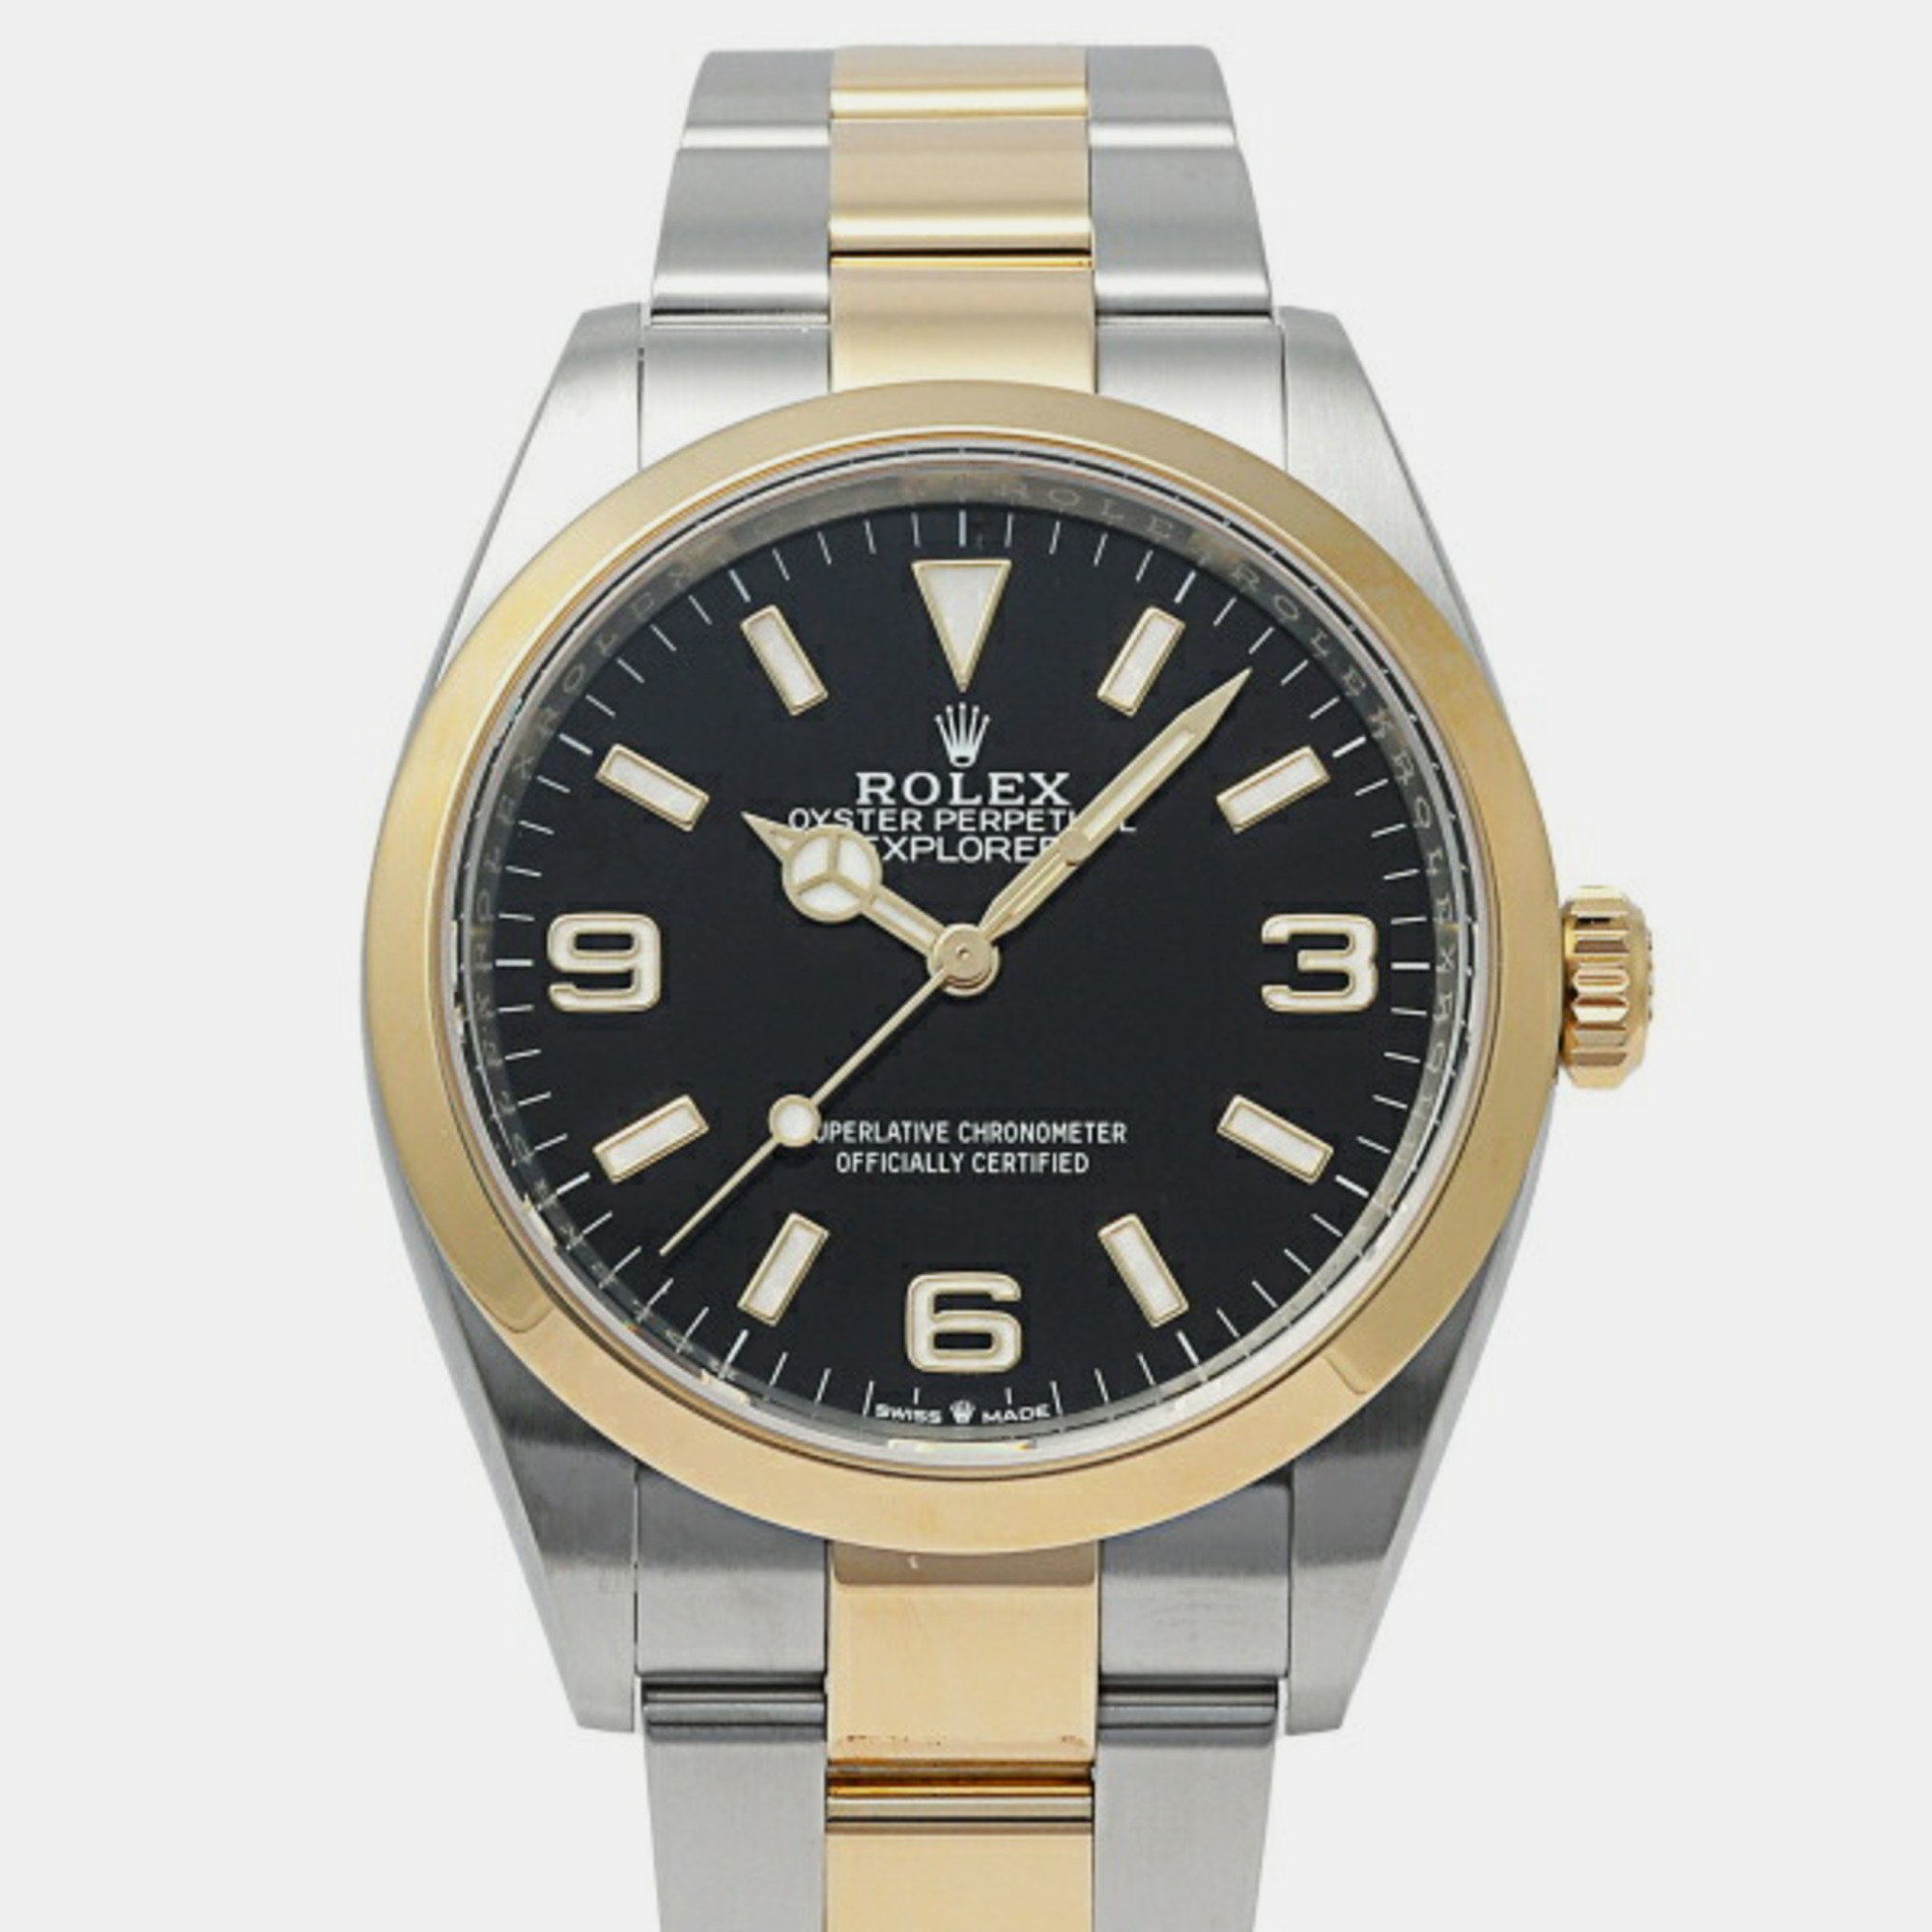 Rolex black 18k yellow gold and stainless steel explorer 124273 automatic men's wristwatch 36 mm